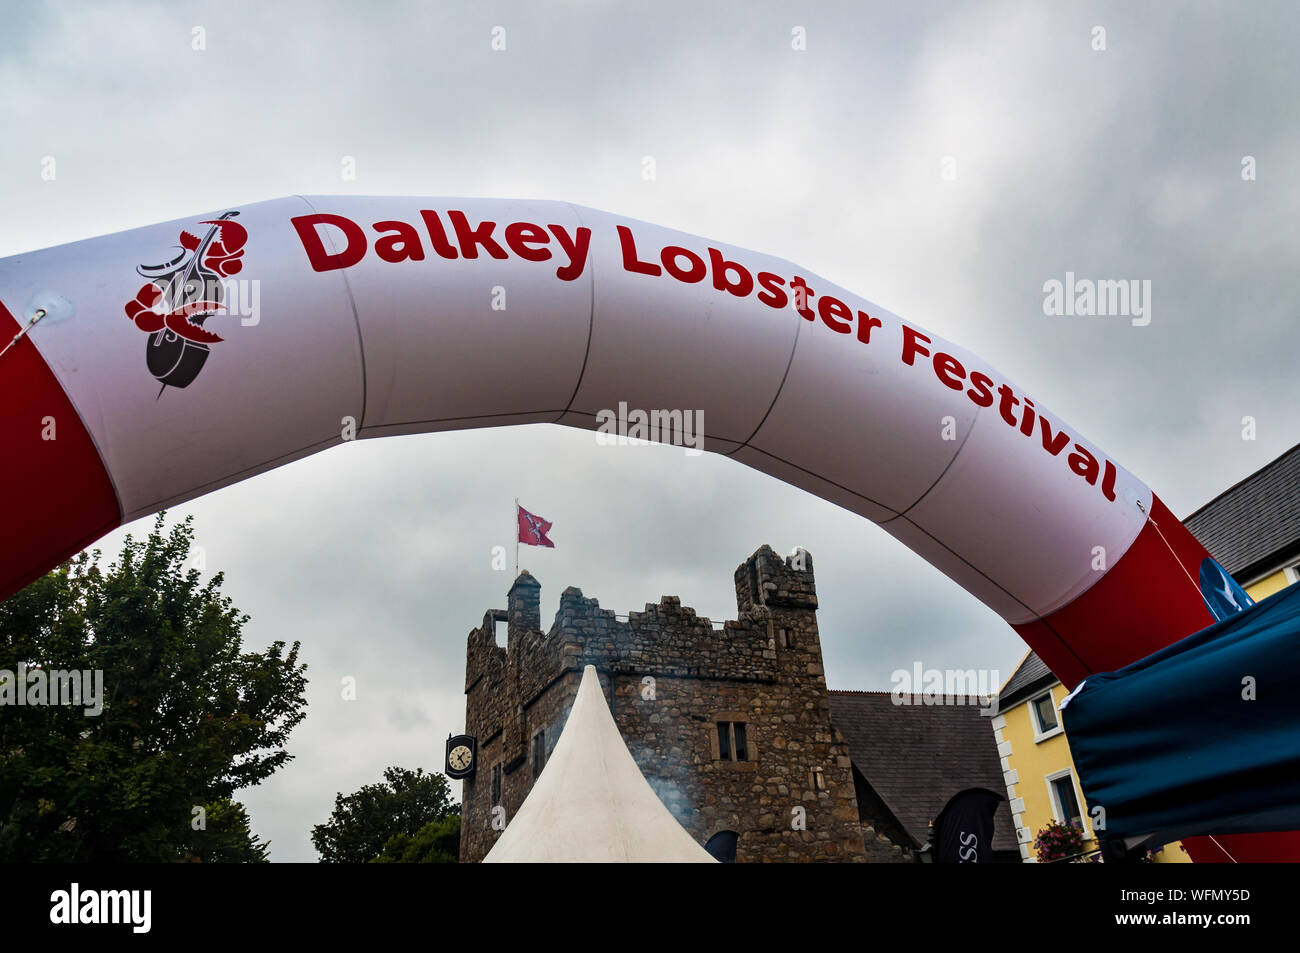 Тriumphal arch of the Festival. Dalkey, Dublin, Ireland.25 August 2019.  Seafood “Dalkey Lobster Festival” Stock Photo